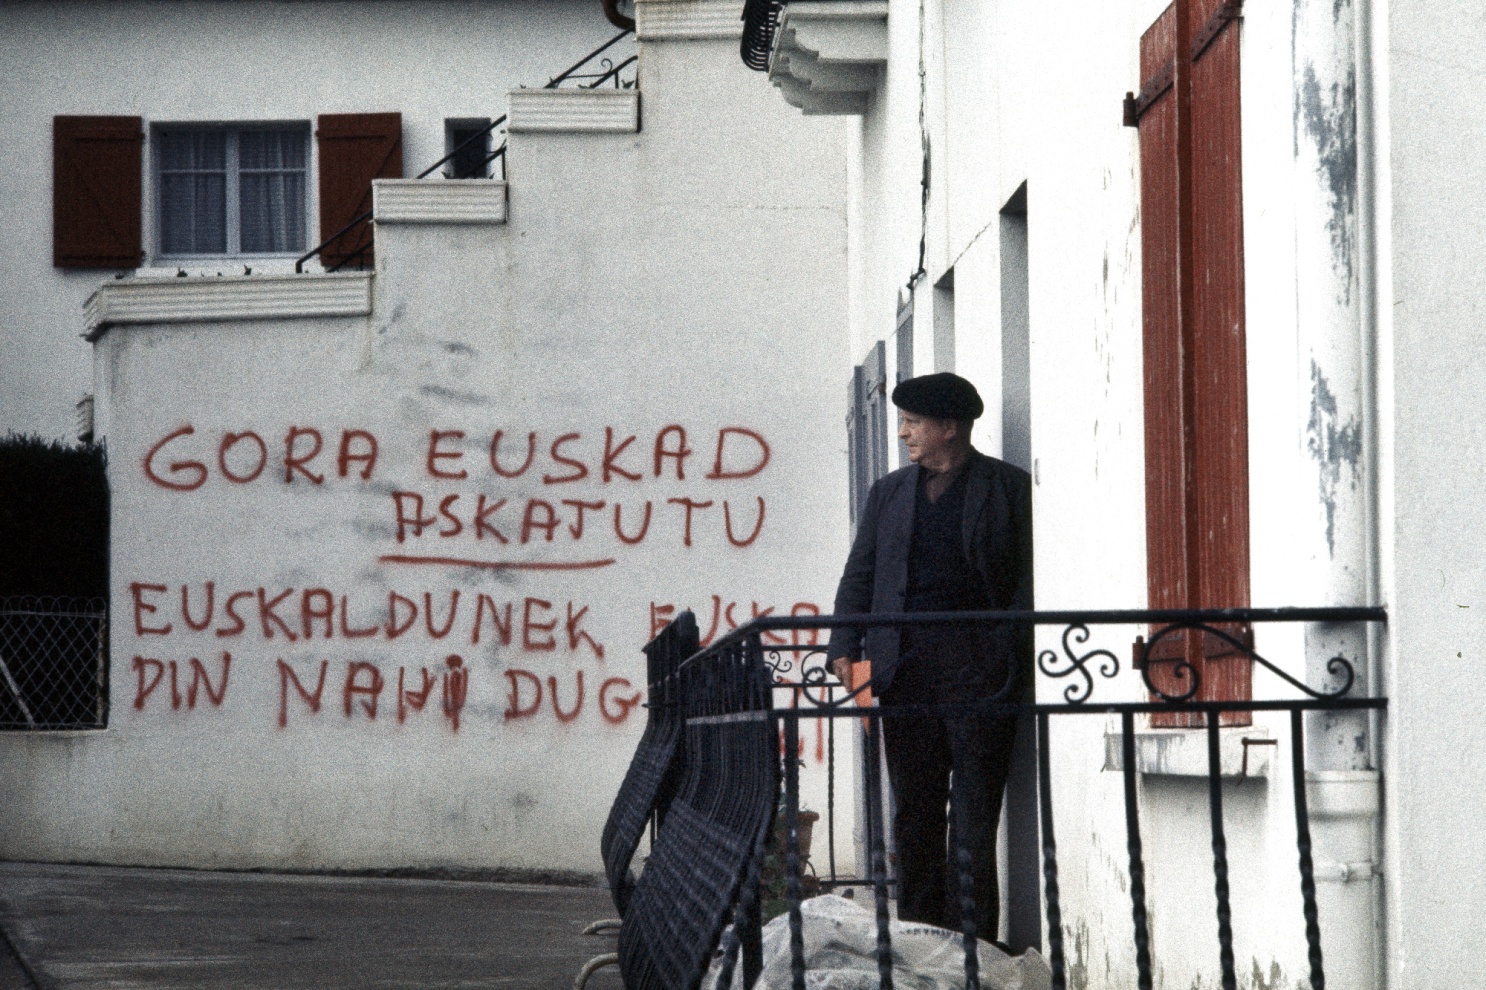 France, 1974. Written on a wall in Itxassou (Pays Basque, North Euskadi). The Basque writing "gora Euskad askatutu" means "freedom for the Basques"